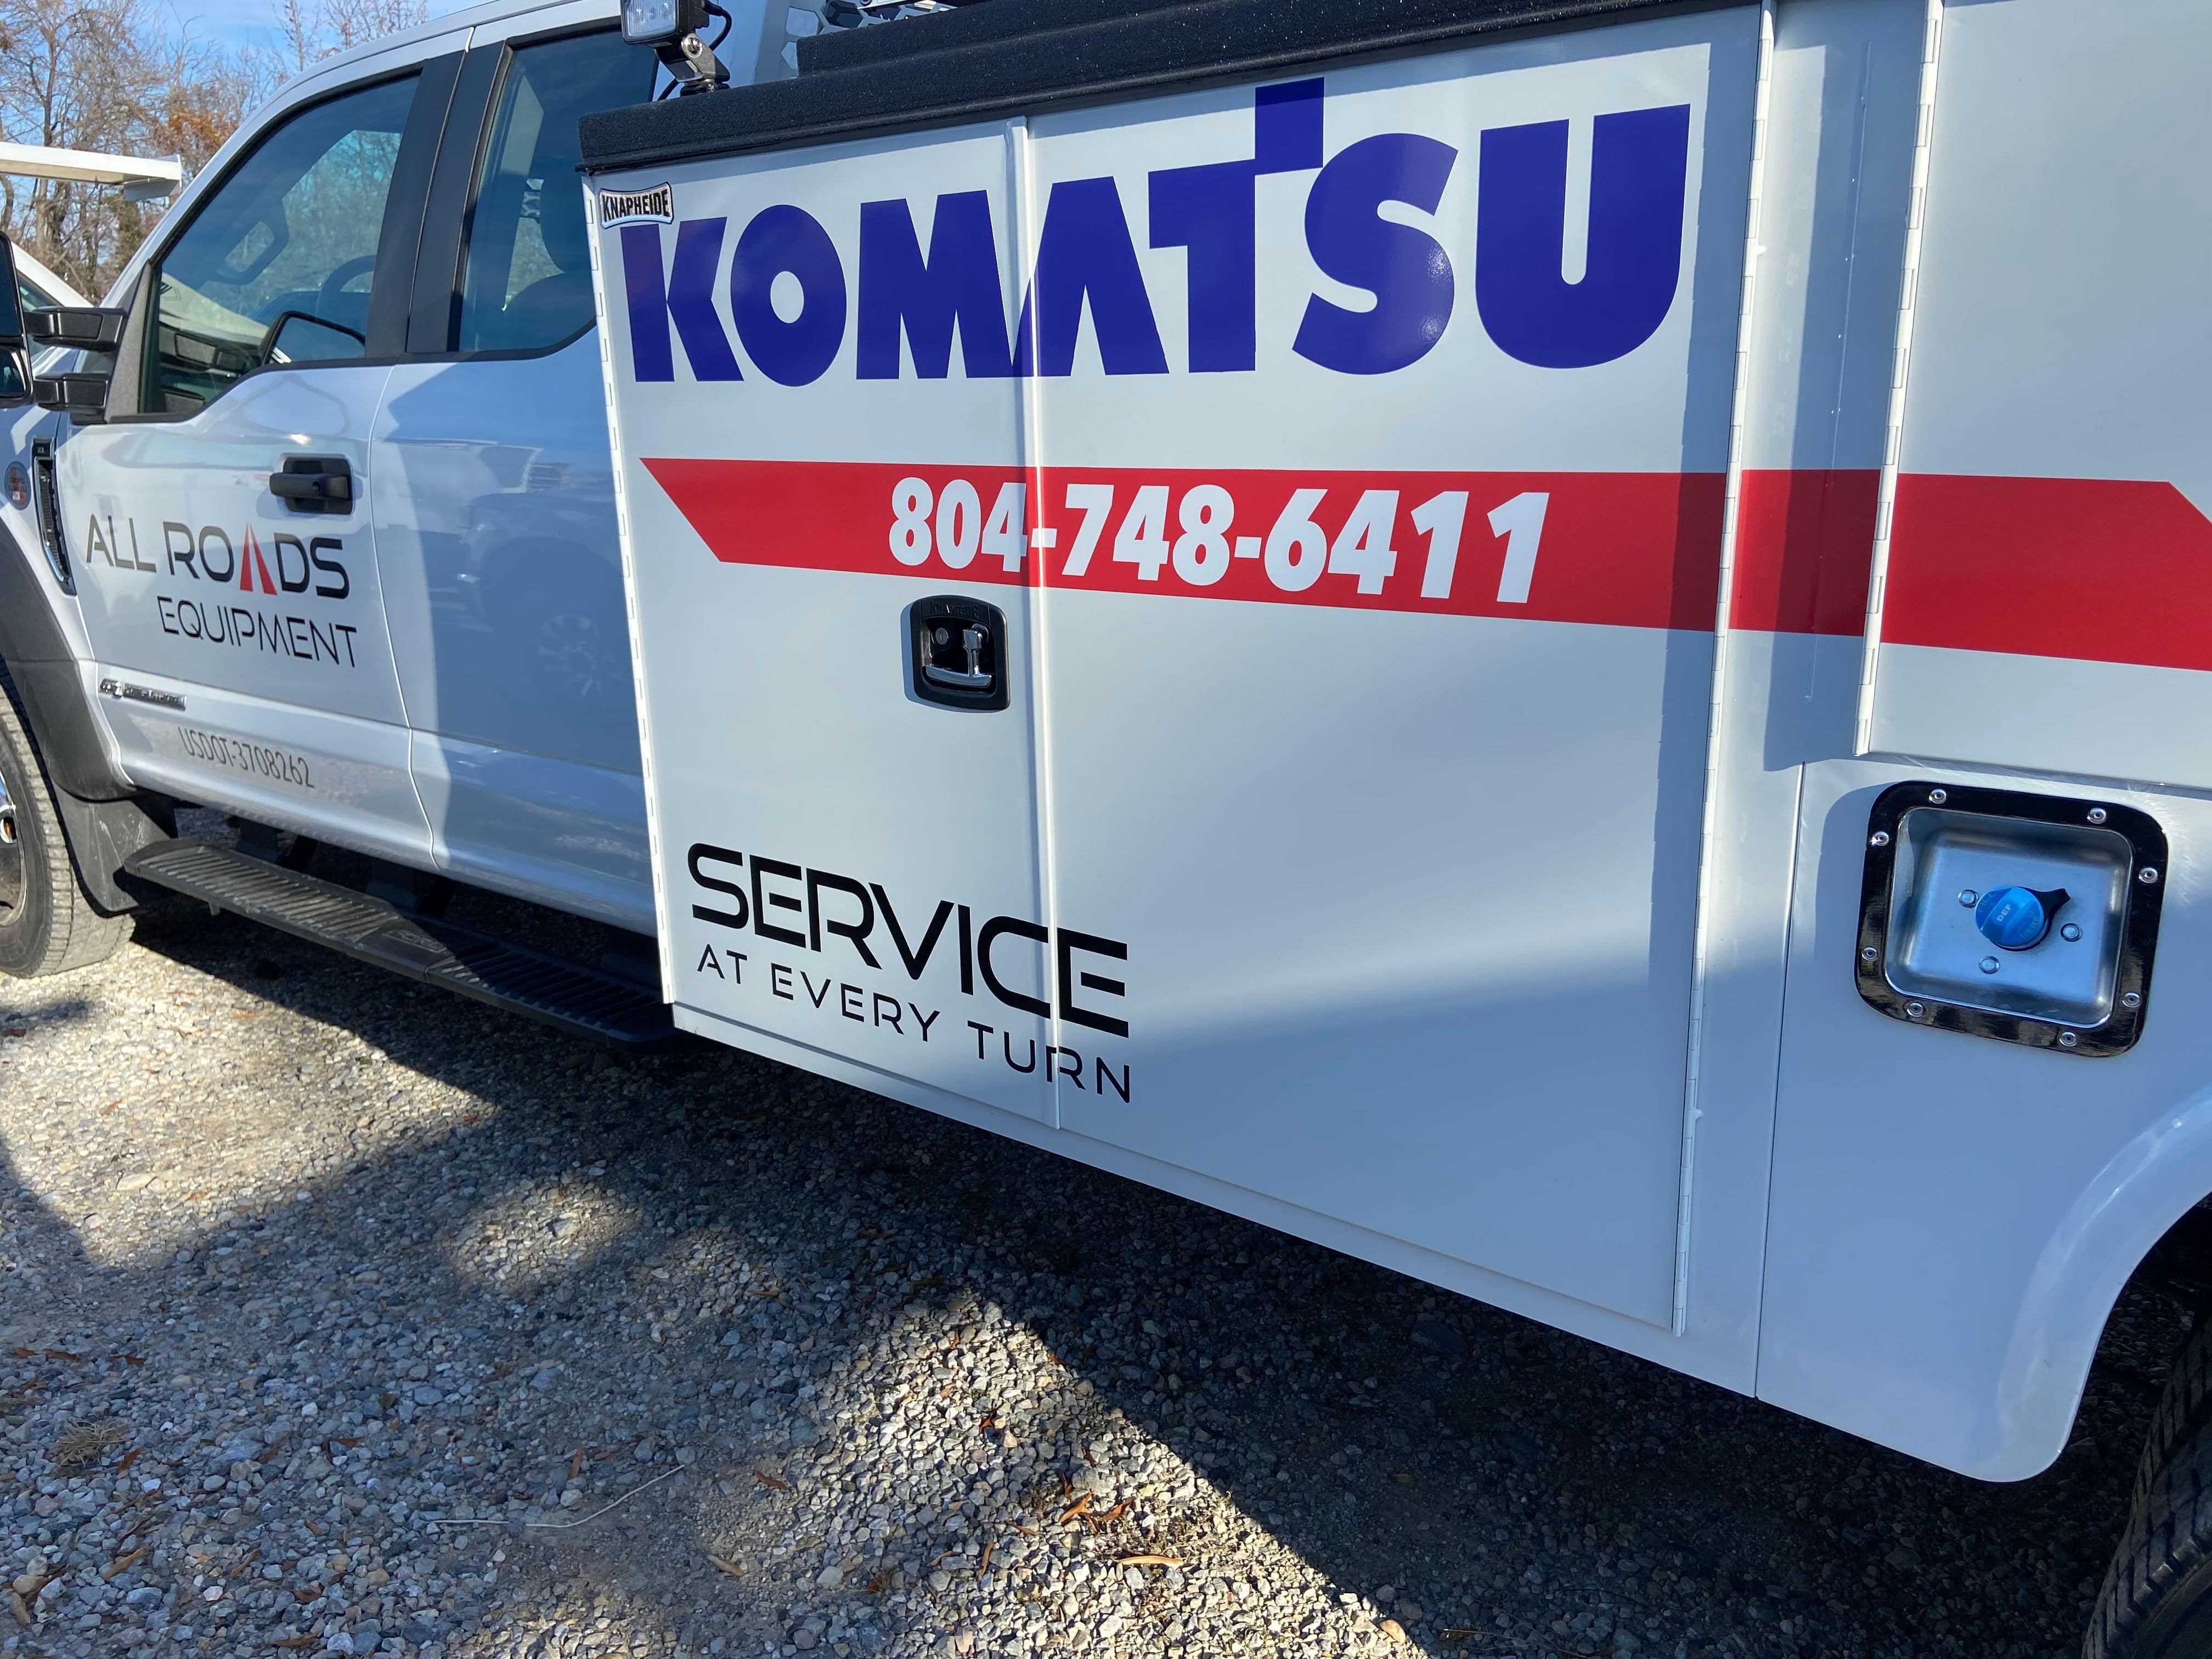 Komatsu Decal on the Side of a Truck